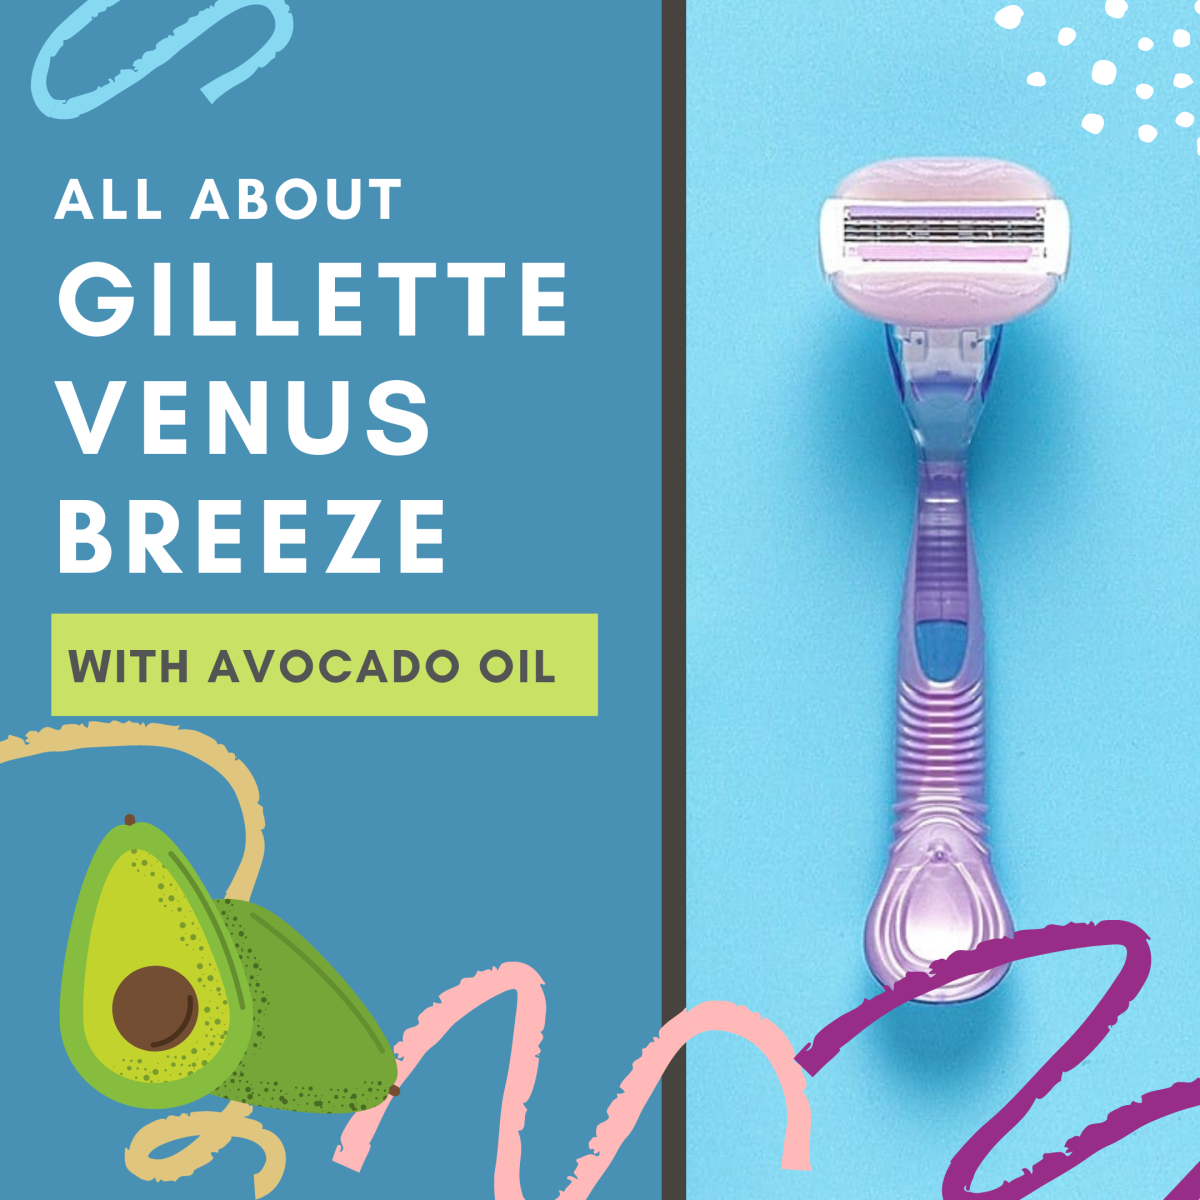 Read on for my review of the Gillette Venus Breeze Razor with Avocado Oil.